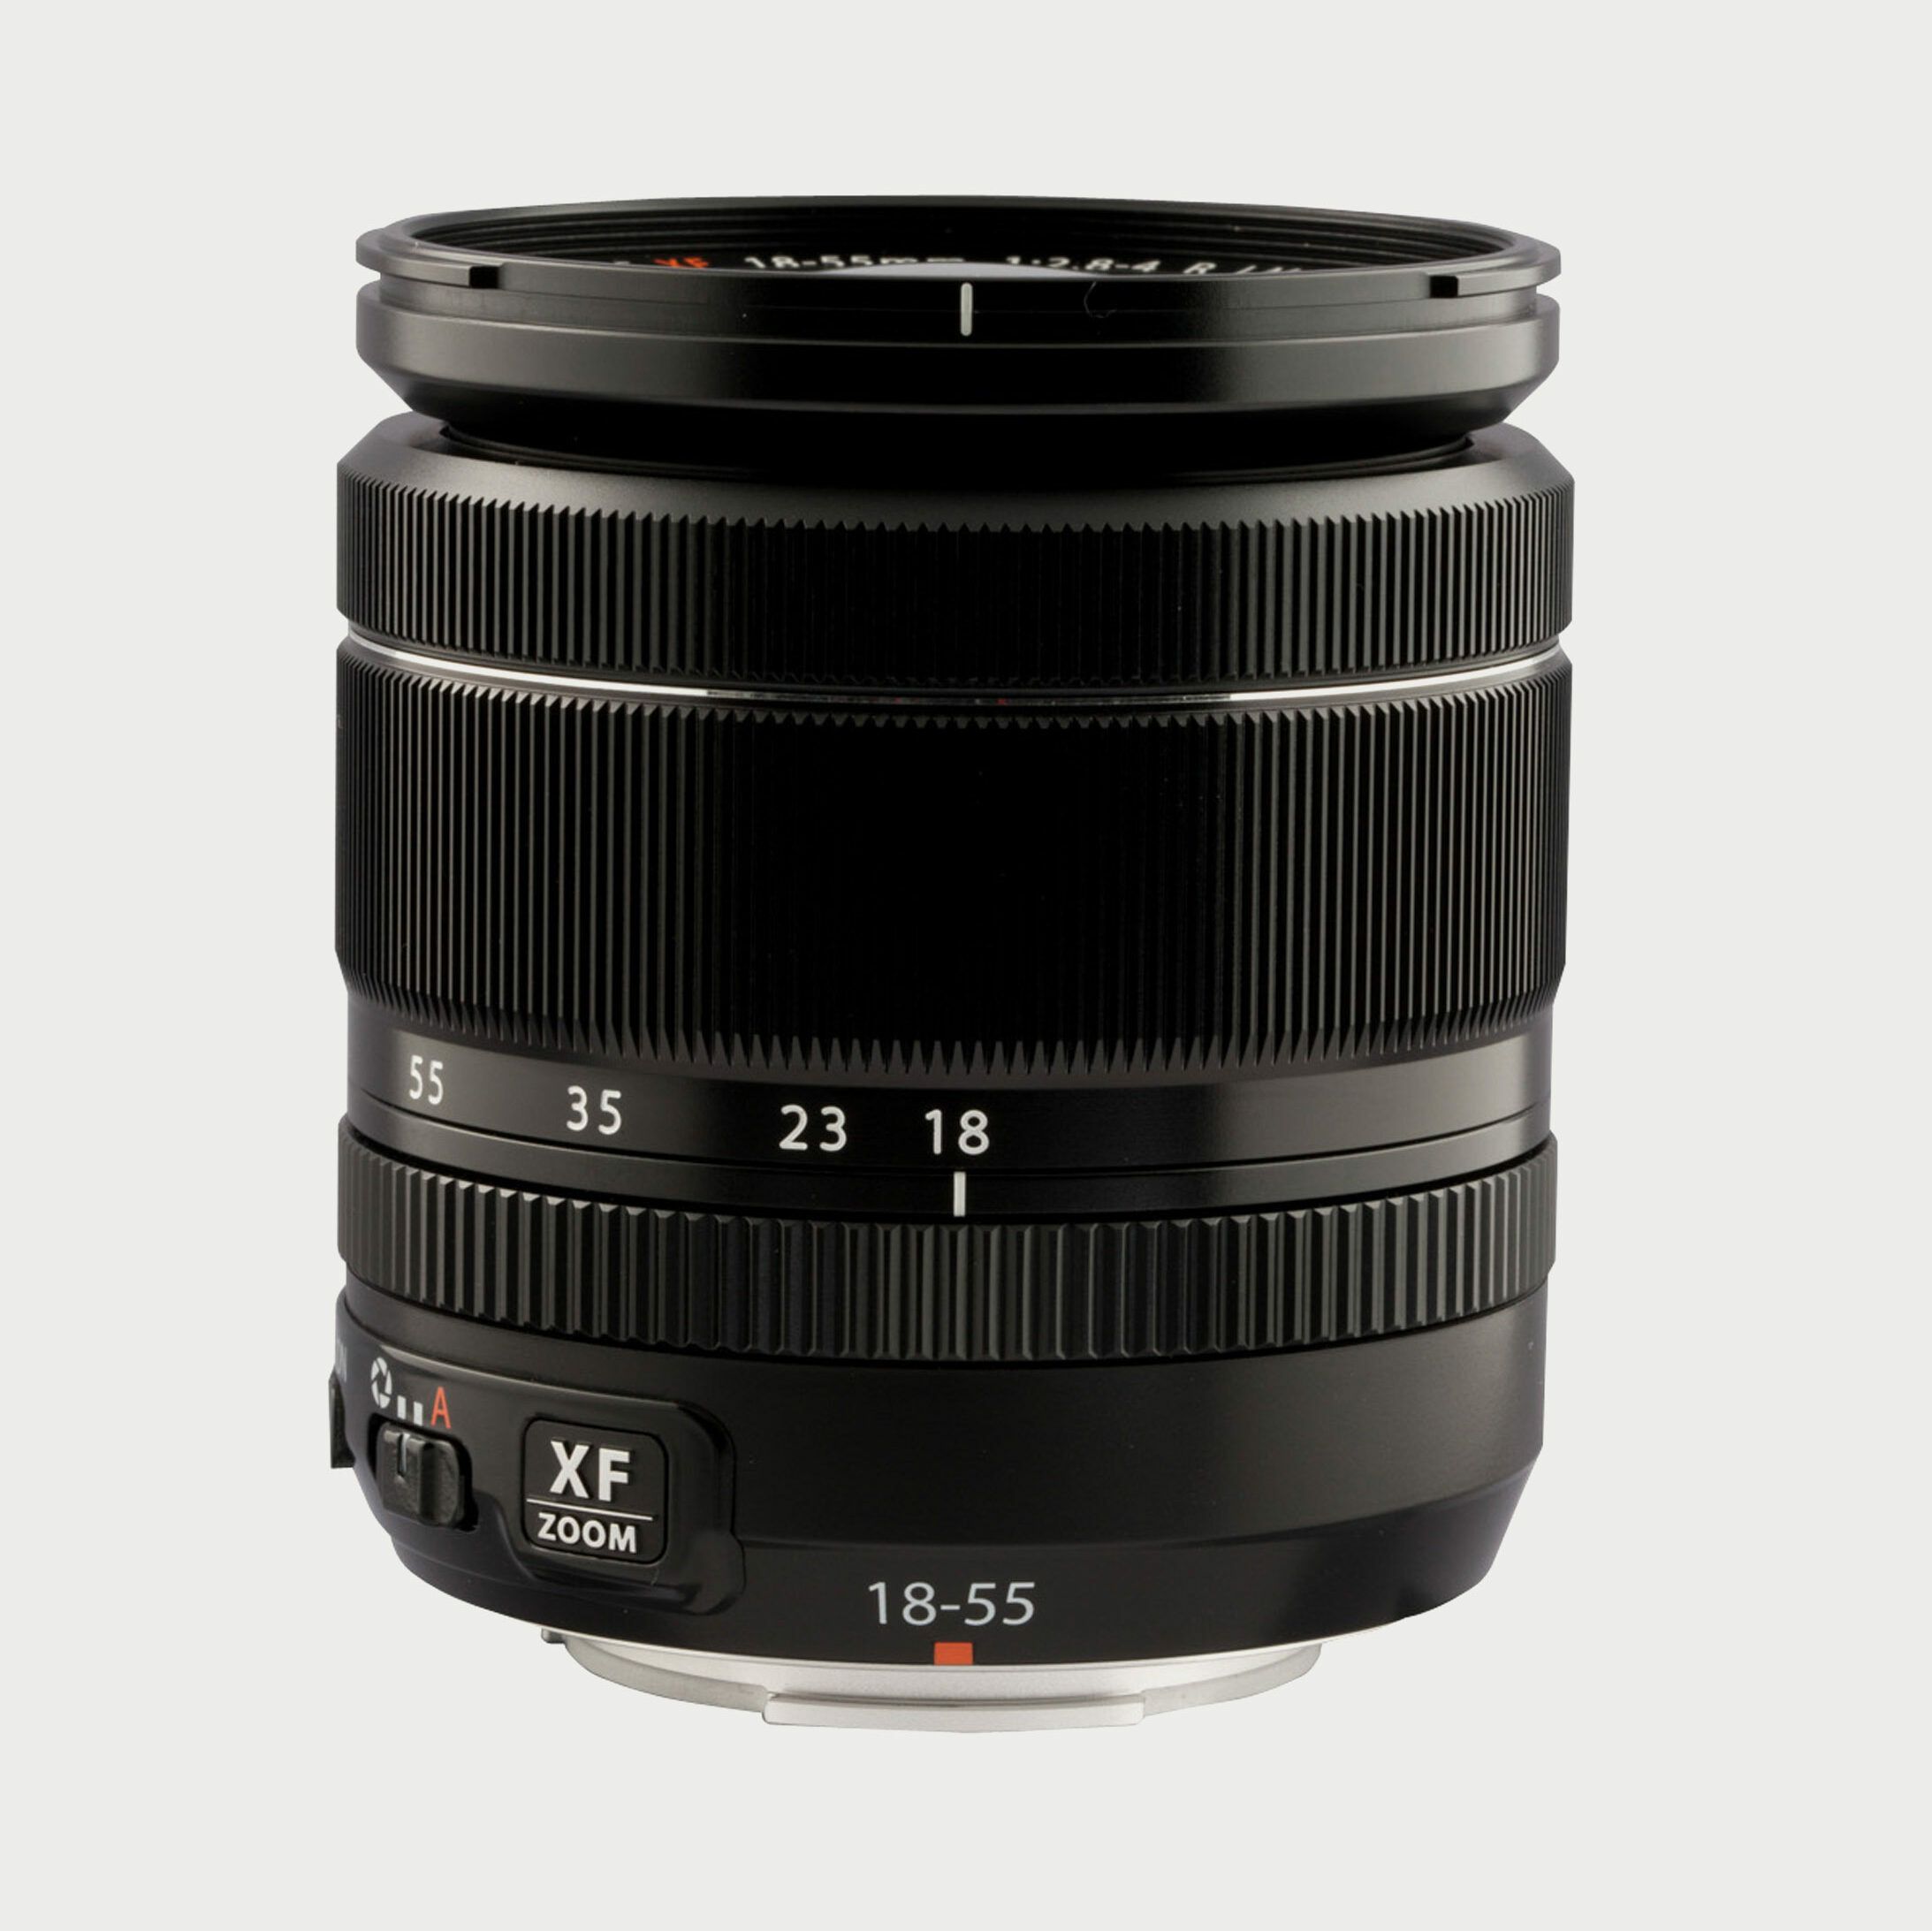 XF 70-300mm F4-5.6 R LM OIS WR Lens | Moment